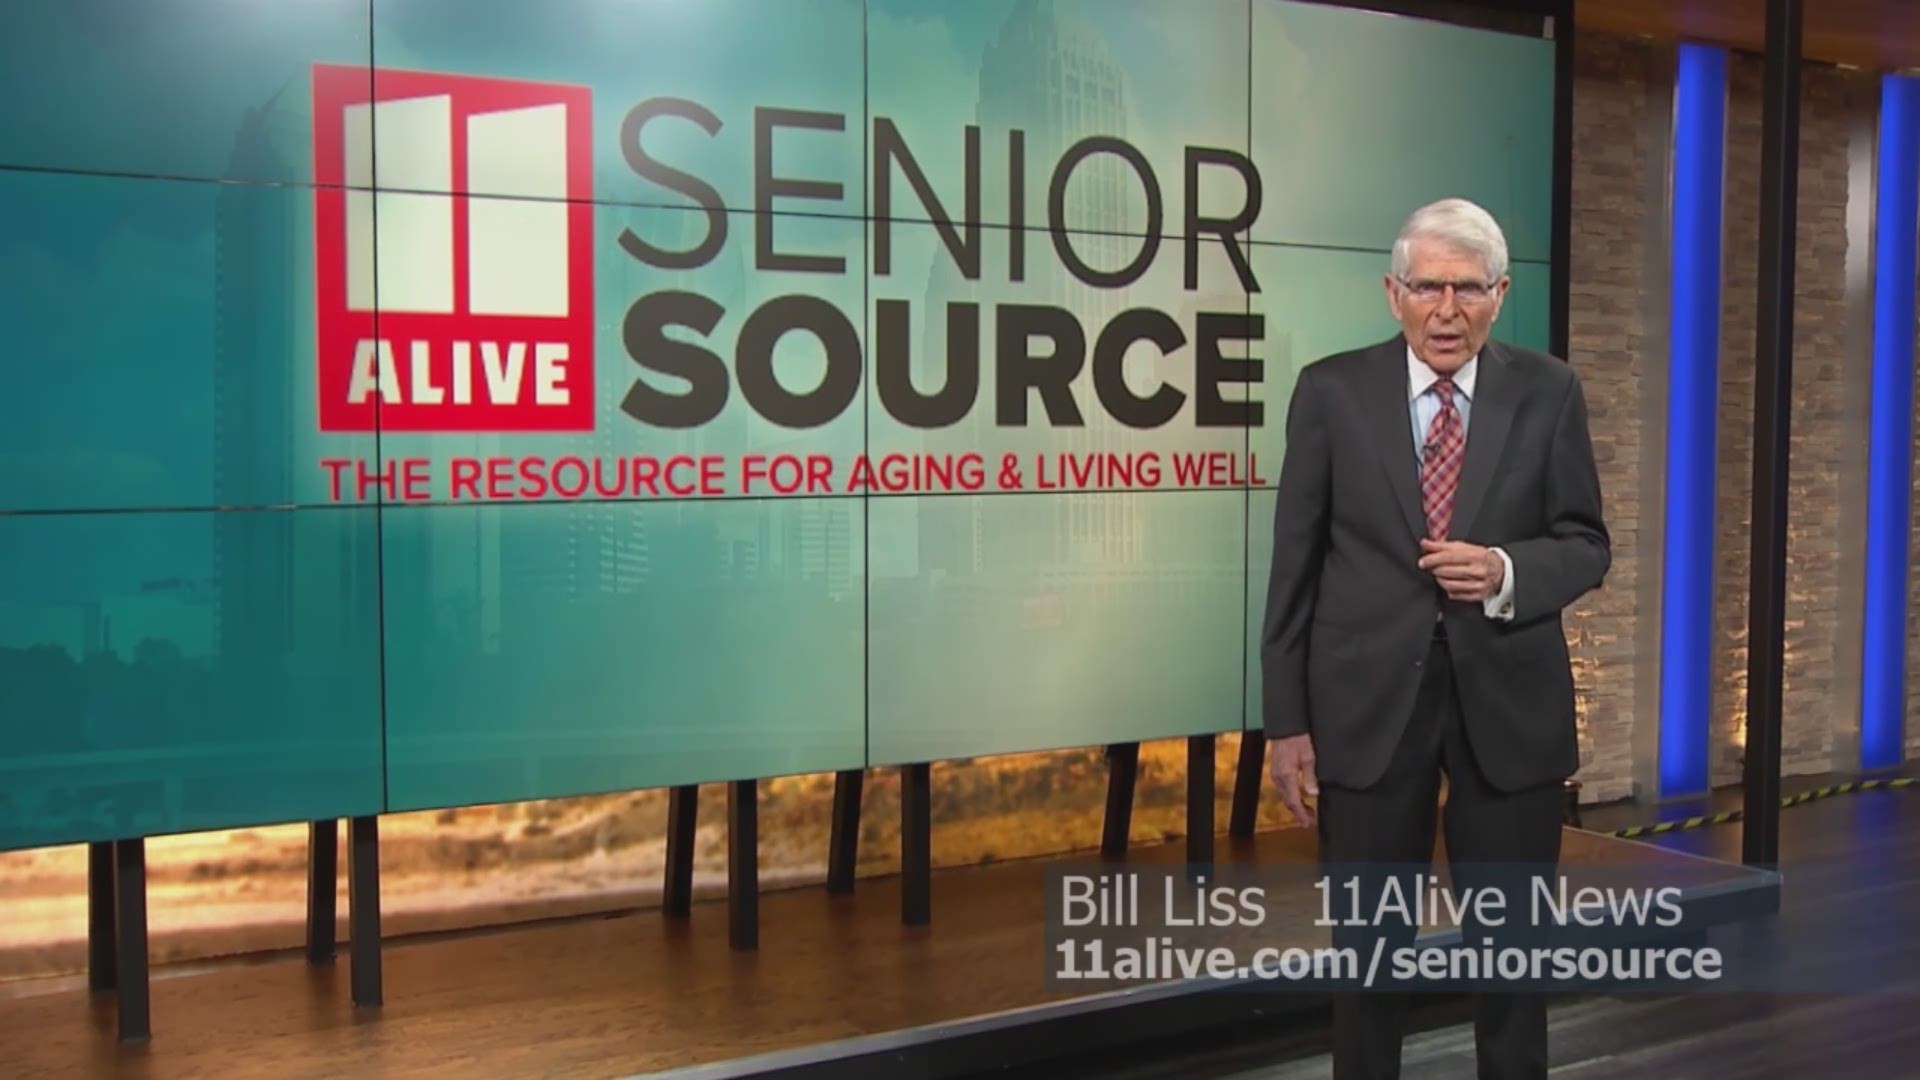 In this message from Senior Source, 11Alive's Bill Liss warns against a scam targeting Medicare recipients.